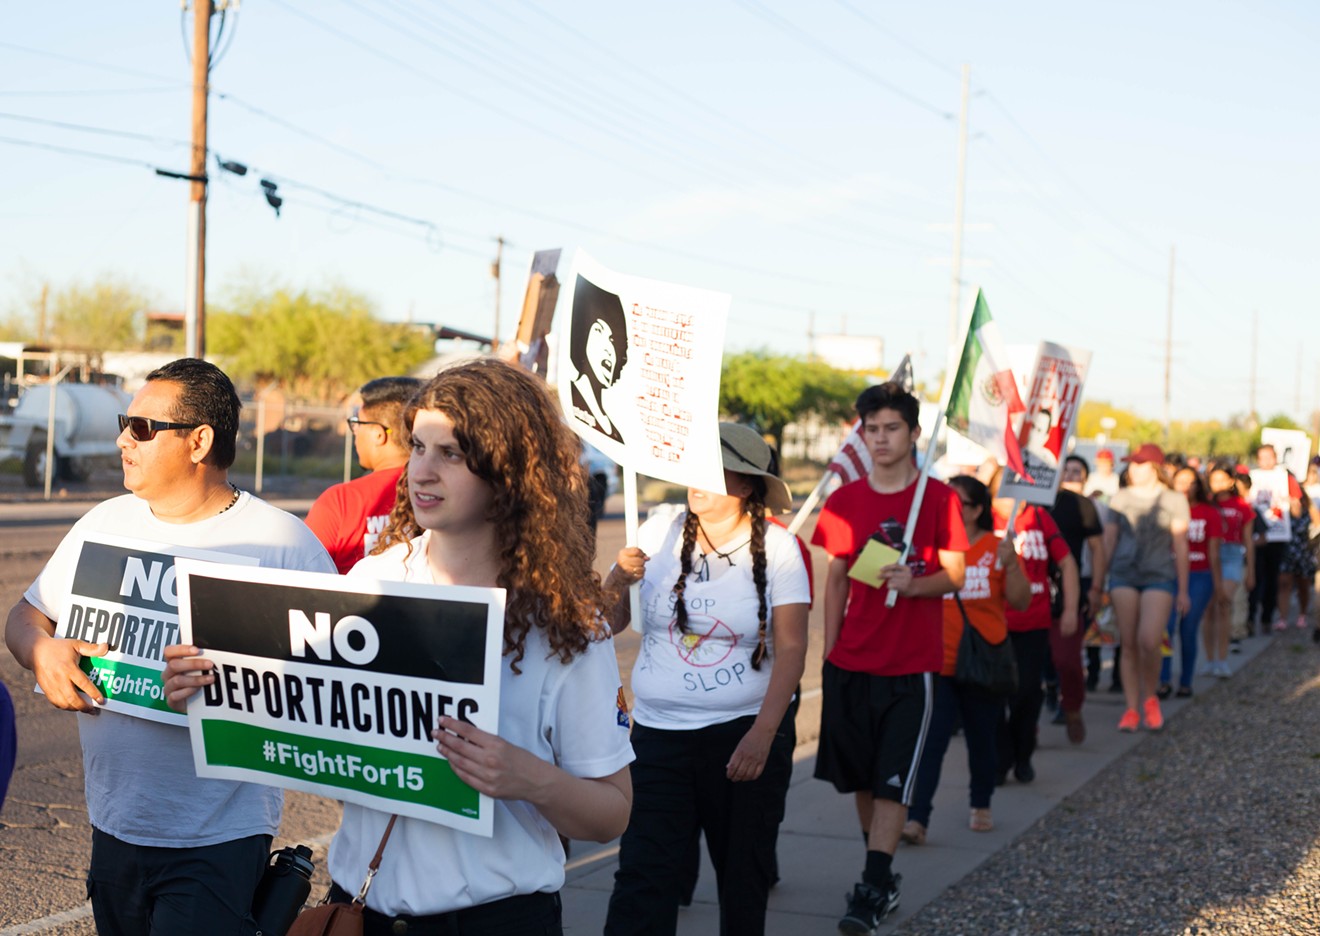 Protesters marched at Tent City recently, but don't expect big participation in Phoenix for the May Day immigrant strike.